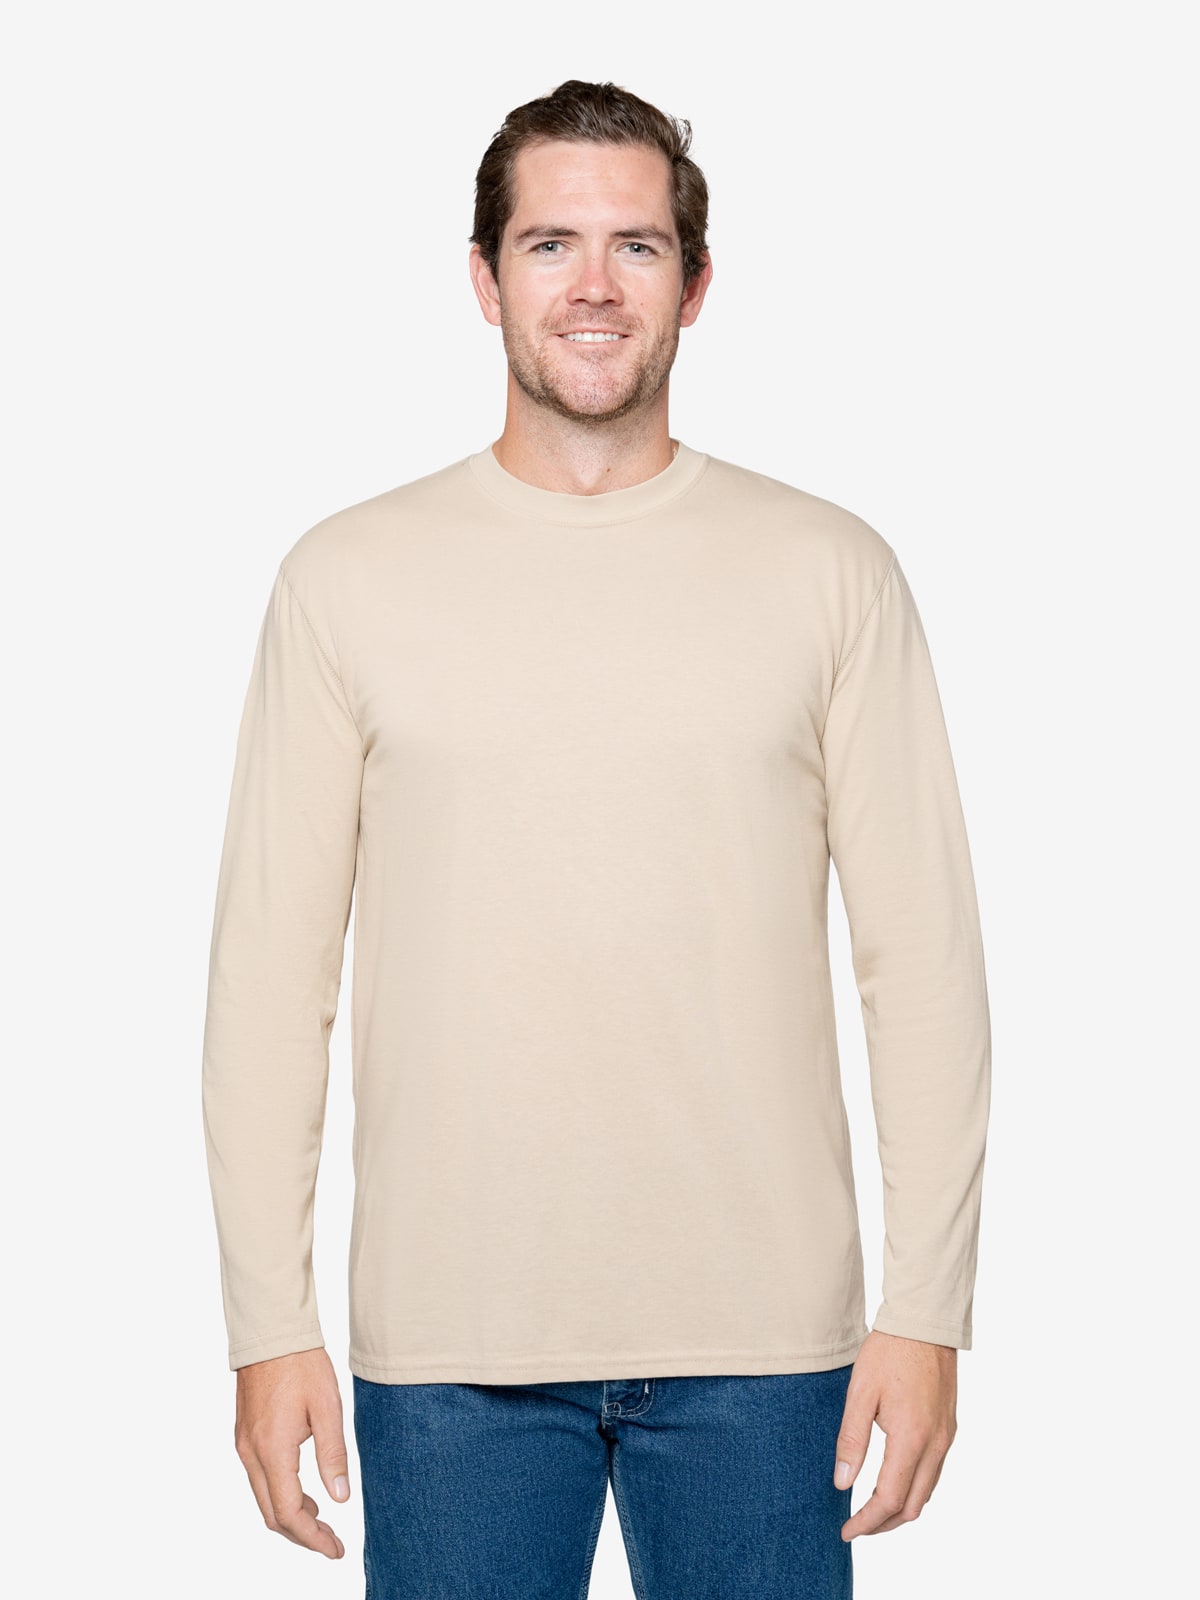 Insect Shield Men's Long Sleeve Wicking T-Shirt | Size 4XL | Grey Heather | Cotton/Polyester